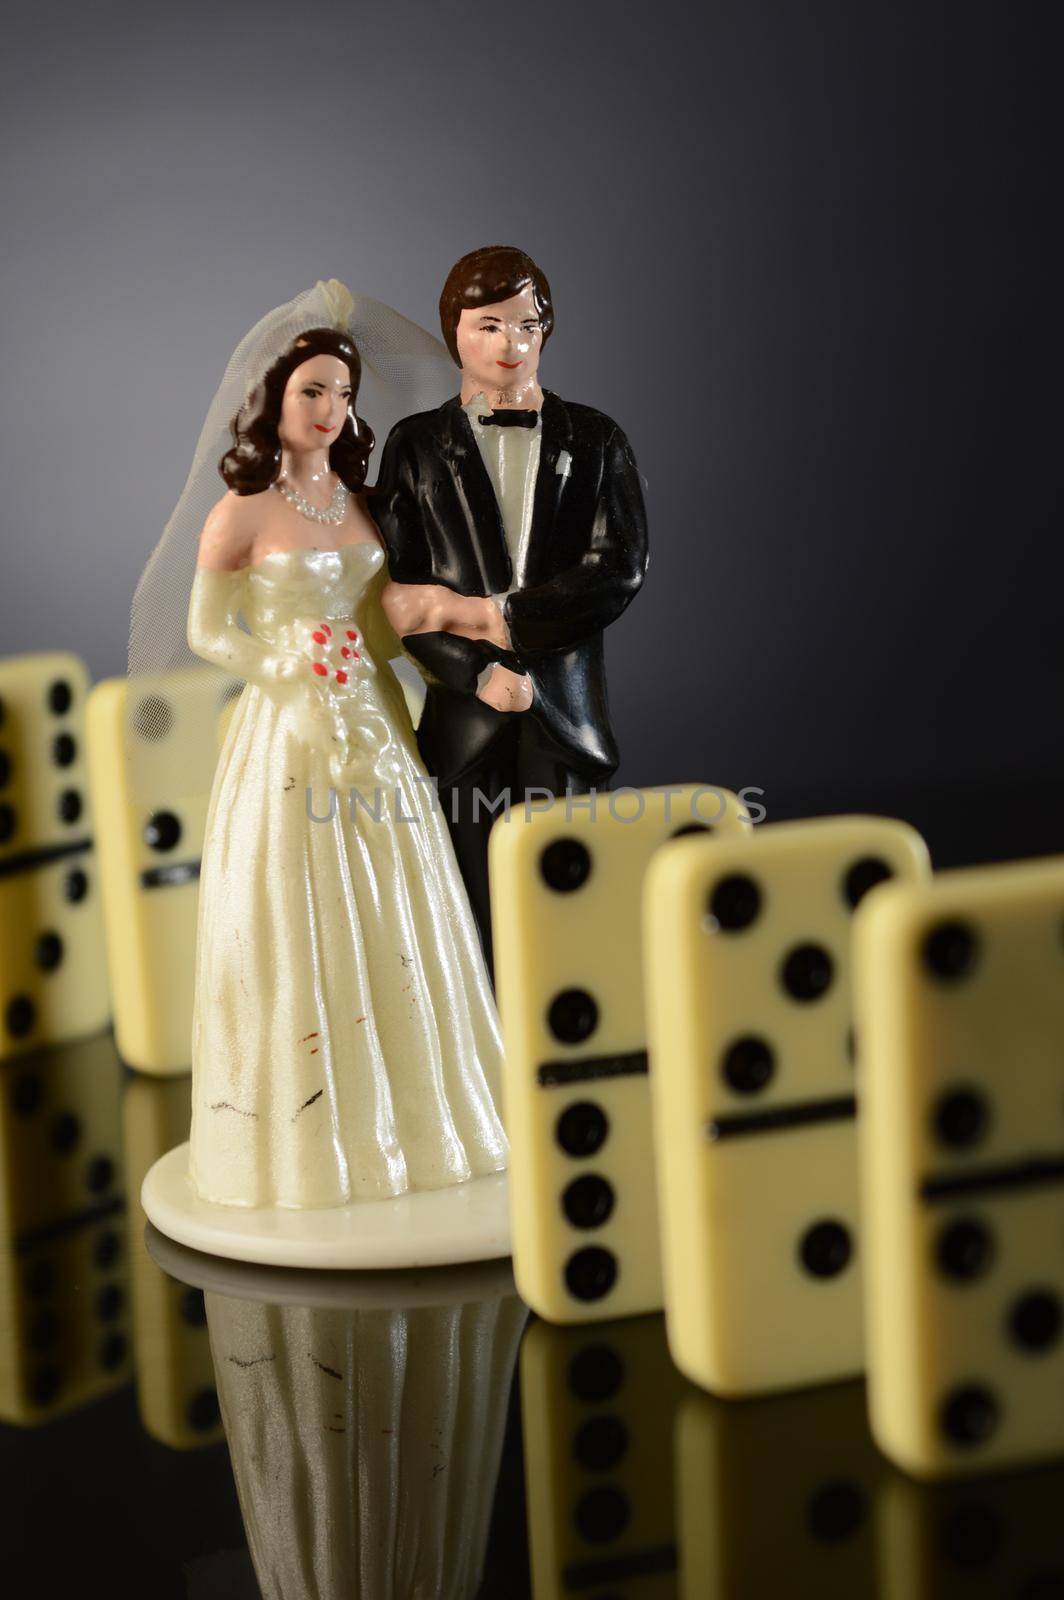 The domino effect of marriage concept utilized by a wedding cake topper.